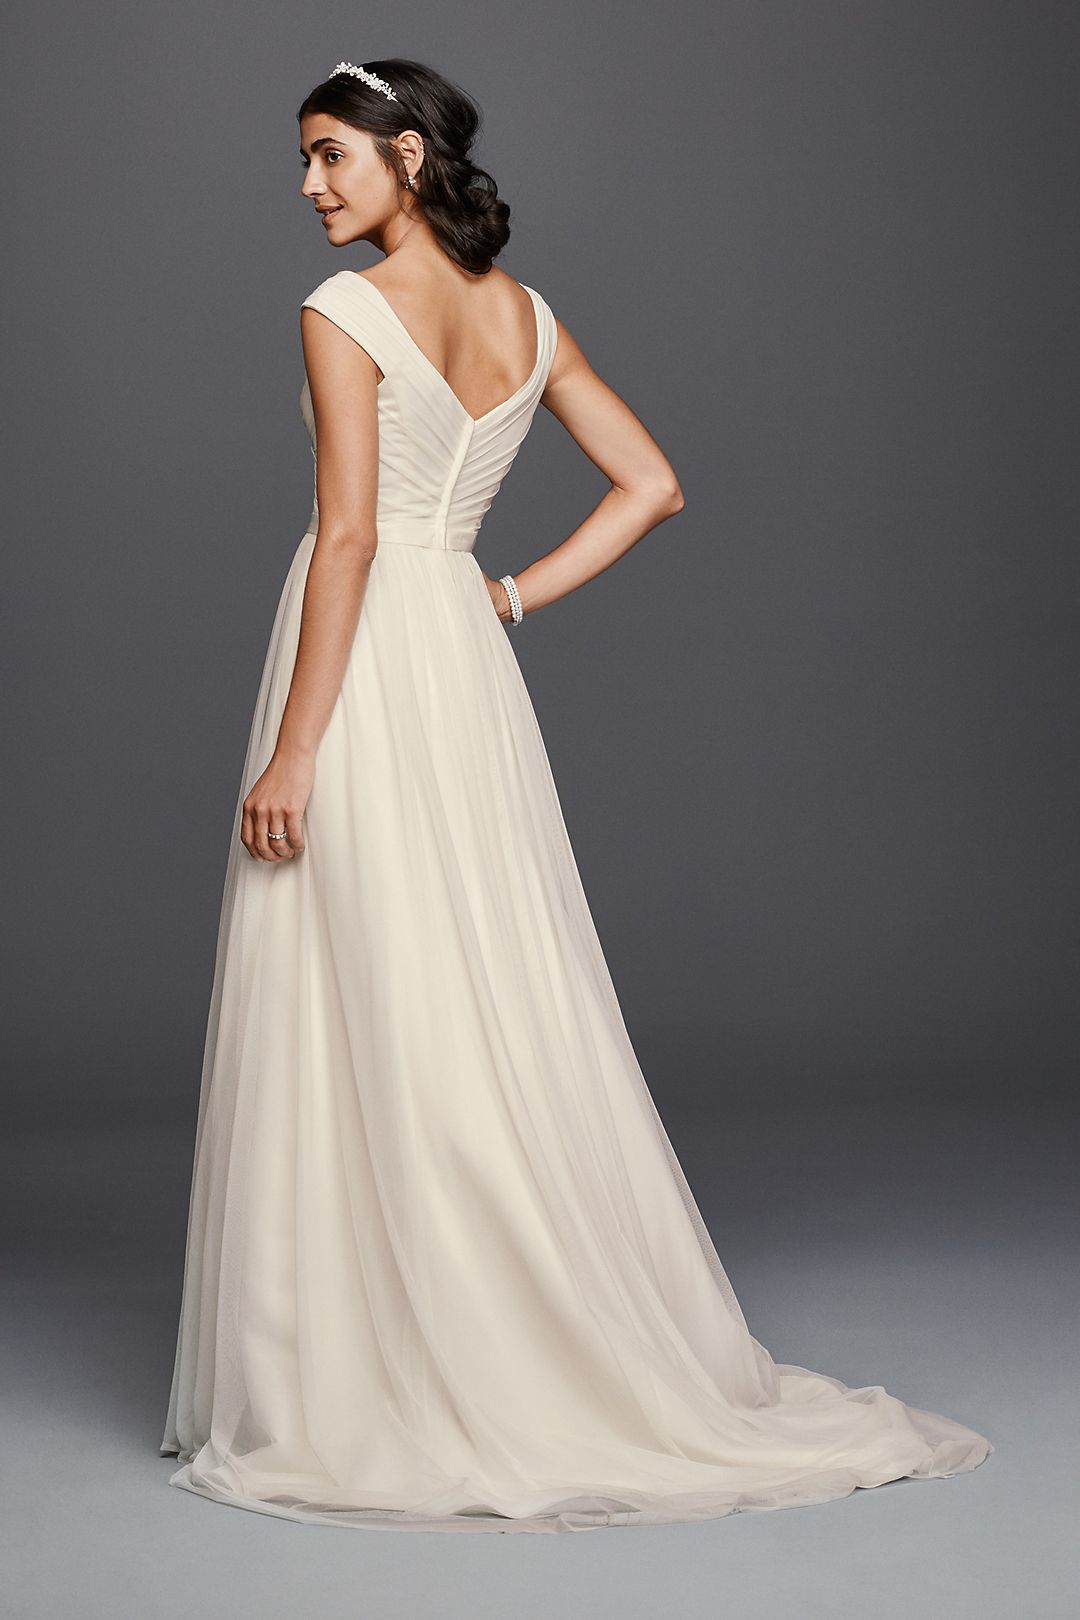 Tulle A-line Wedding Dress with Beaded Sash  Image 2